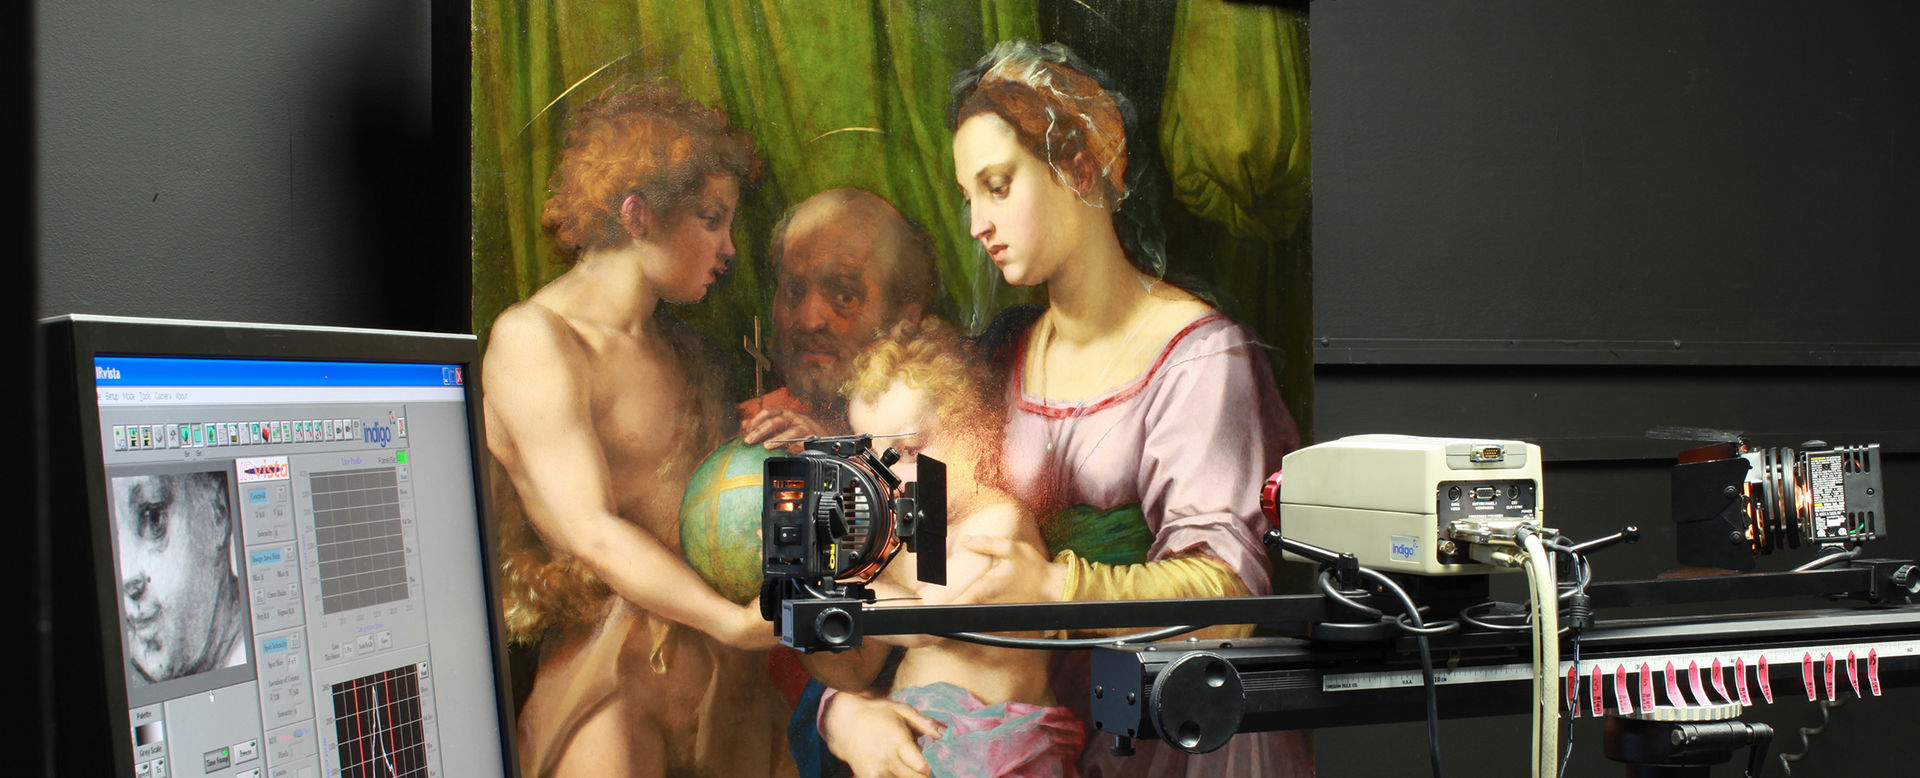 Scientific imaging equipment scan an artwork by Andrea de Sarto. The results of the scan appear on a computer screen to the left of the image.